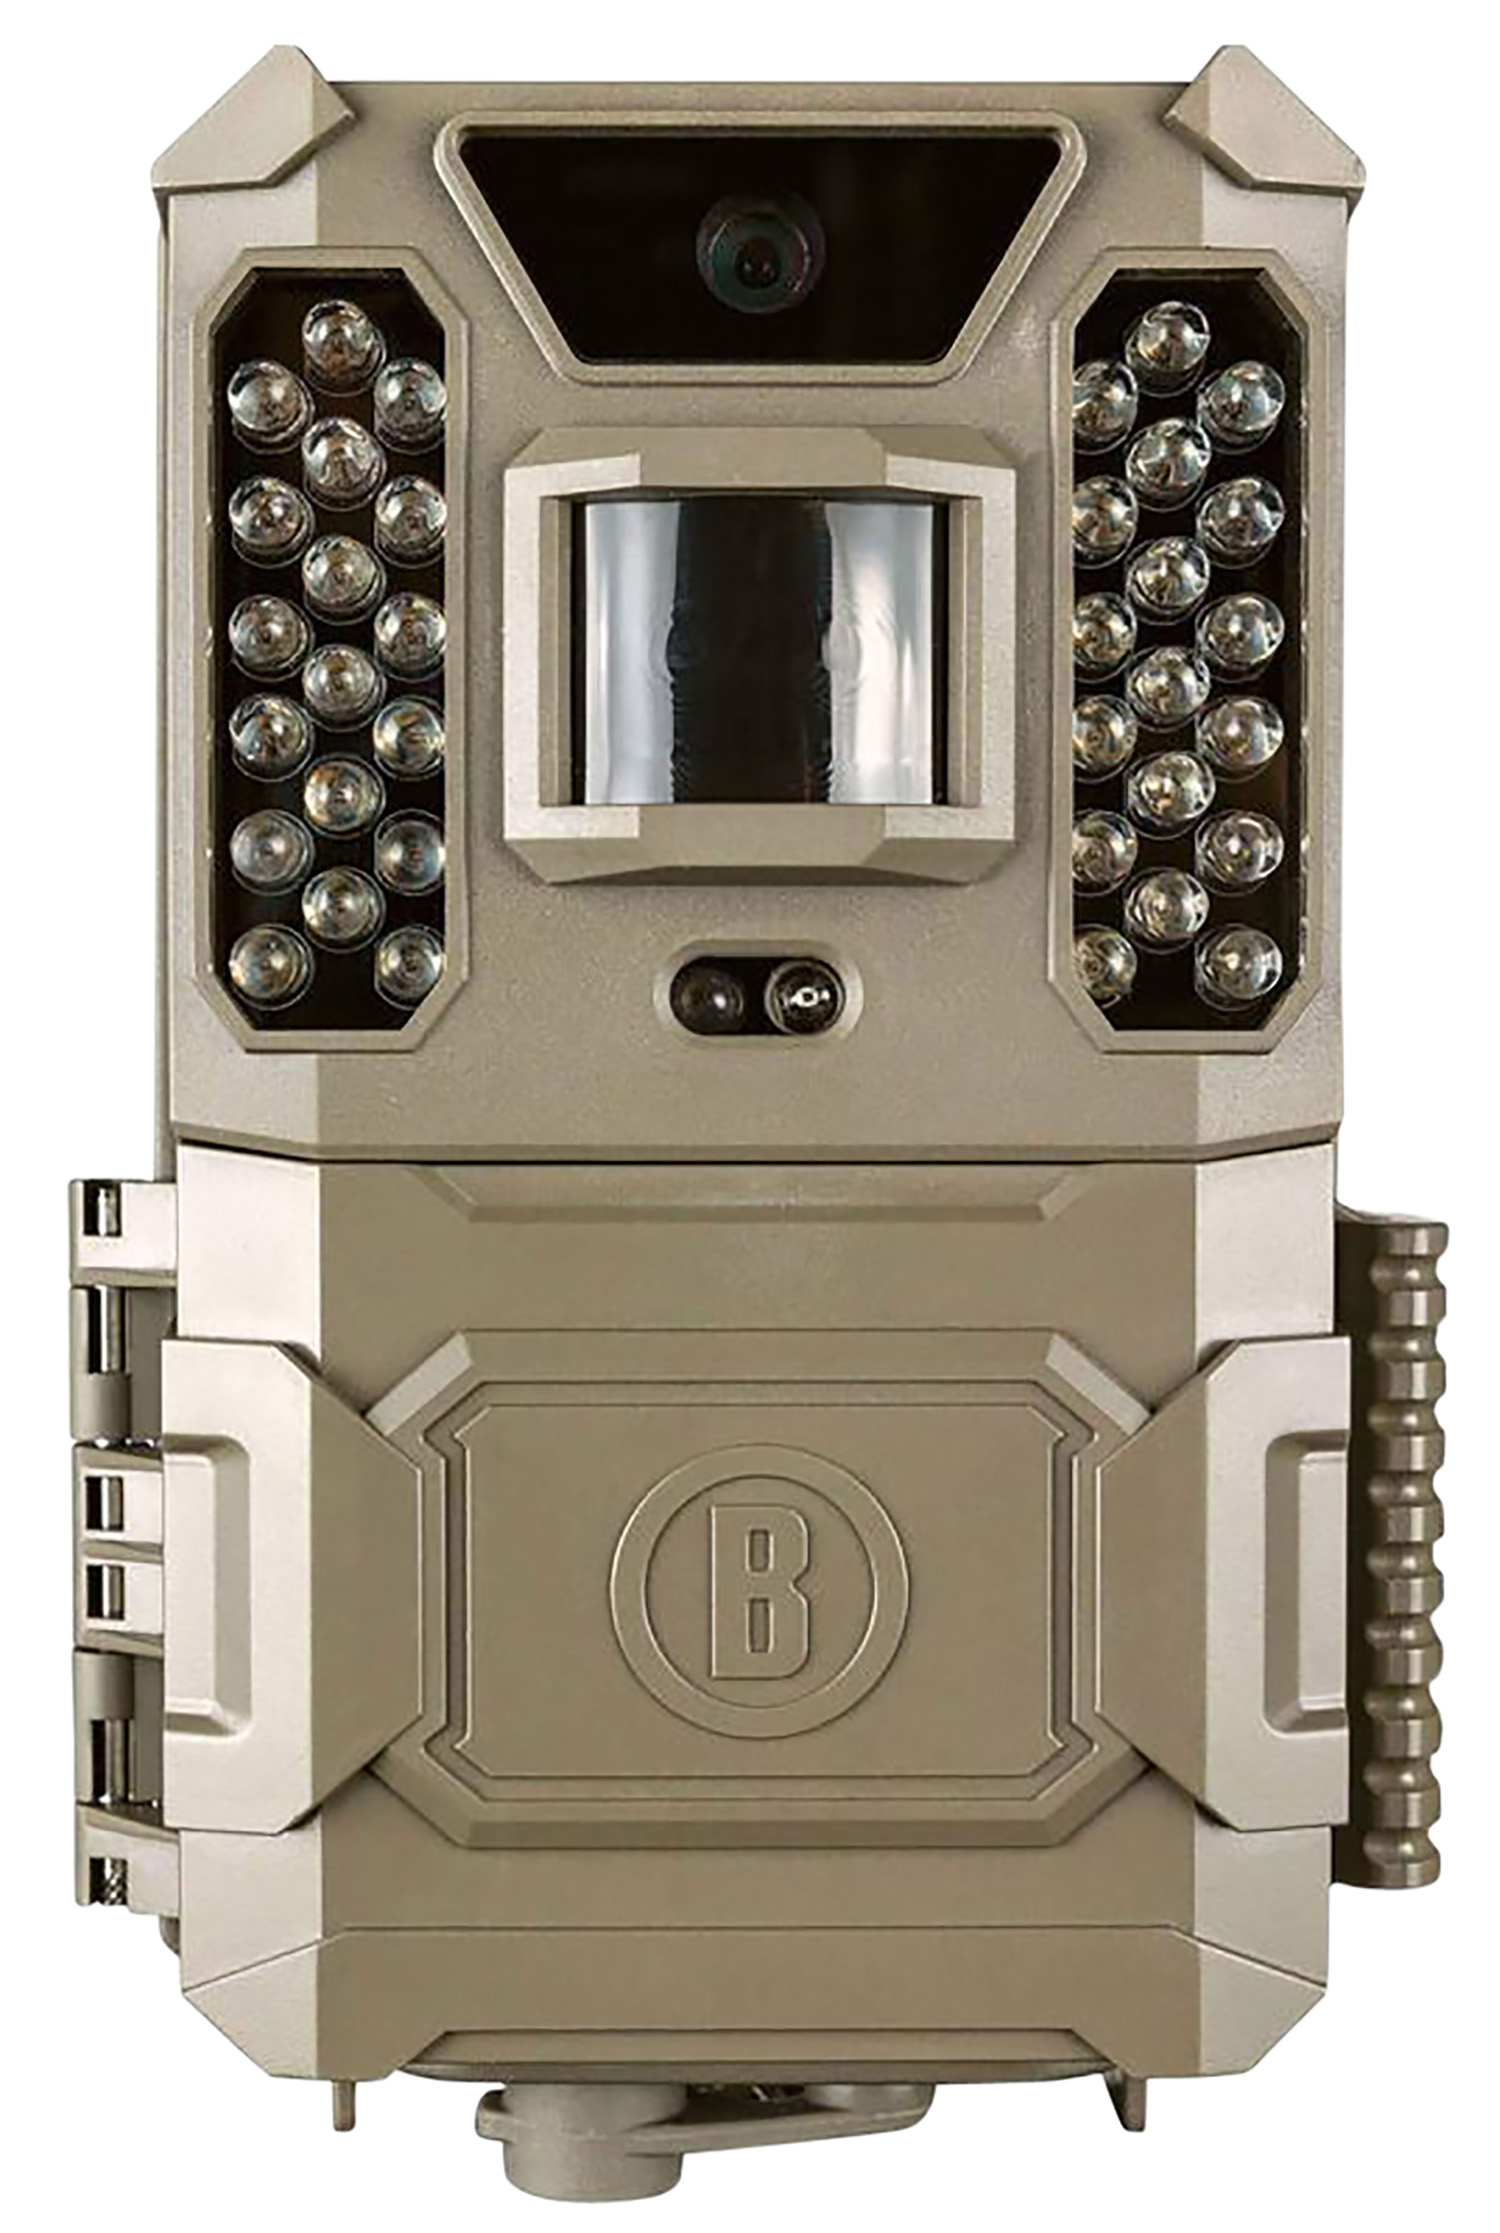 Bushnell by Primos 119932C Prime  Brown LCD Display 24 MP Resolution Low Glow Flash 32GB Memory